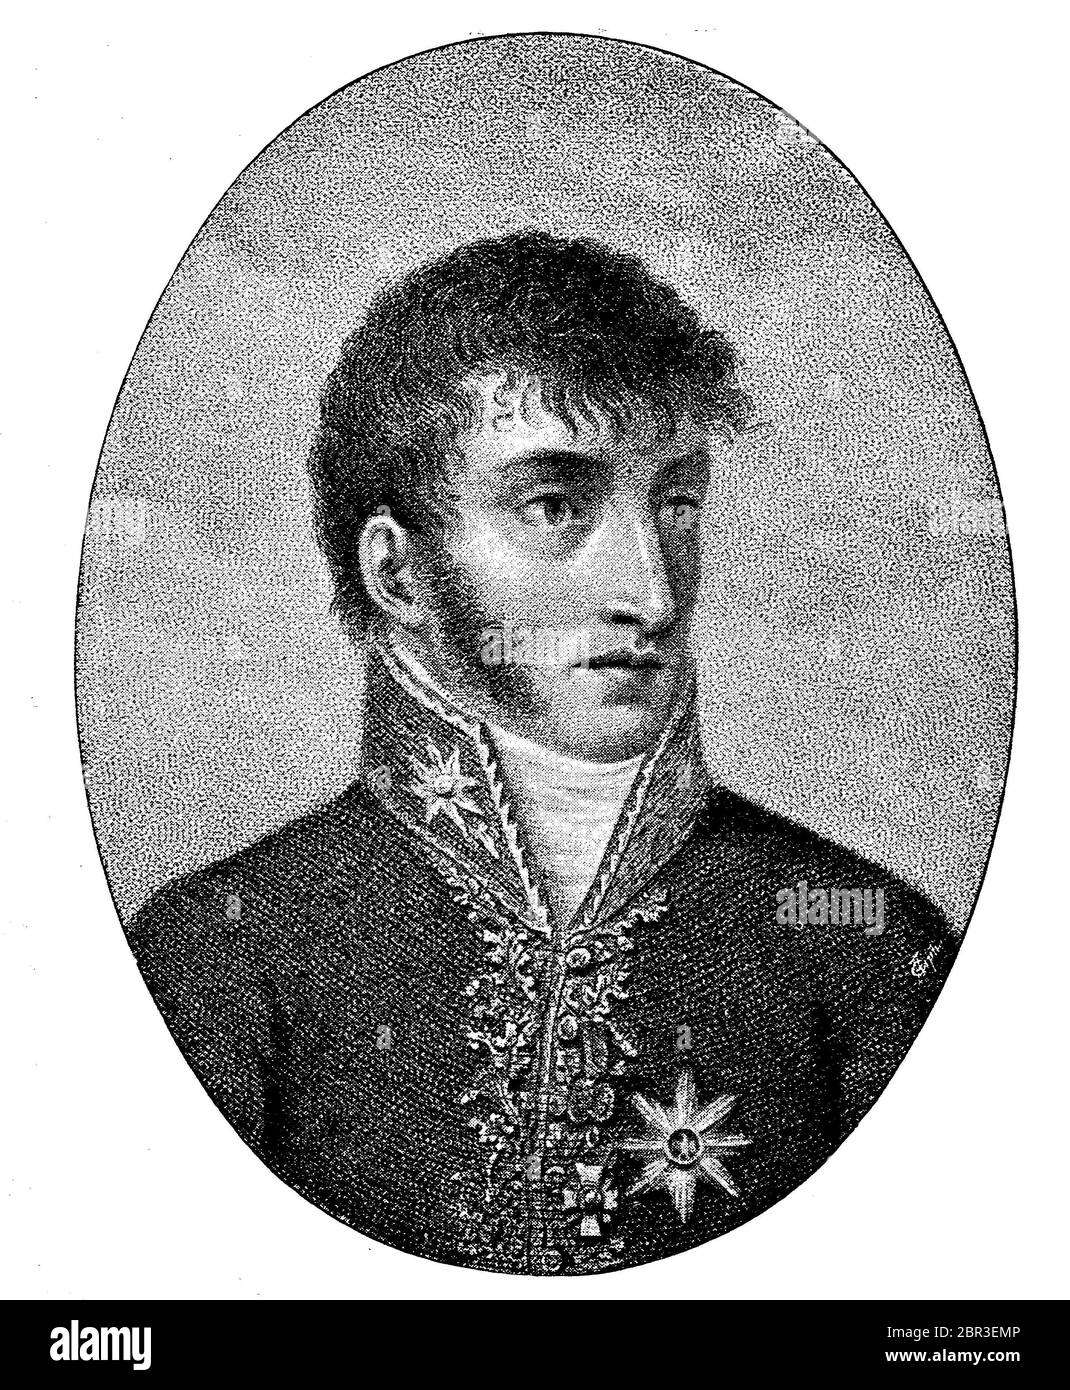 Louis Napoleon Bonaparte, September 2, 1778 - July 25, was one of four brothers of the Emperor Napoleon I of France. From 1806 to 1810, he served as Lodewijk Napoleon King of created by his brother Kingdom of Holland  /  Louis Napoleon Bonaparte, 2. September 1778 - 25. Juli, war einer von vier Brüdern des Kaisers Napoleon I. von Frankreich. Von 1806 bis 1810 war er als Lodewijk Napoleon König des von seinem Bruder geschaffenen Königreichs Holland, Historisch, historical, digital improved reproduction of an original from the 19th century / digitale Reproduktion einer Originalvorlage aus dem 19 Stock Photo